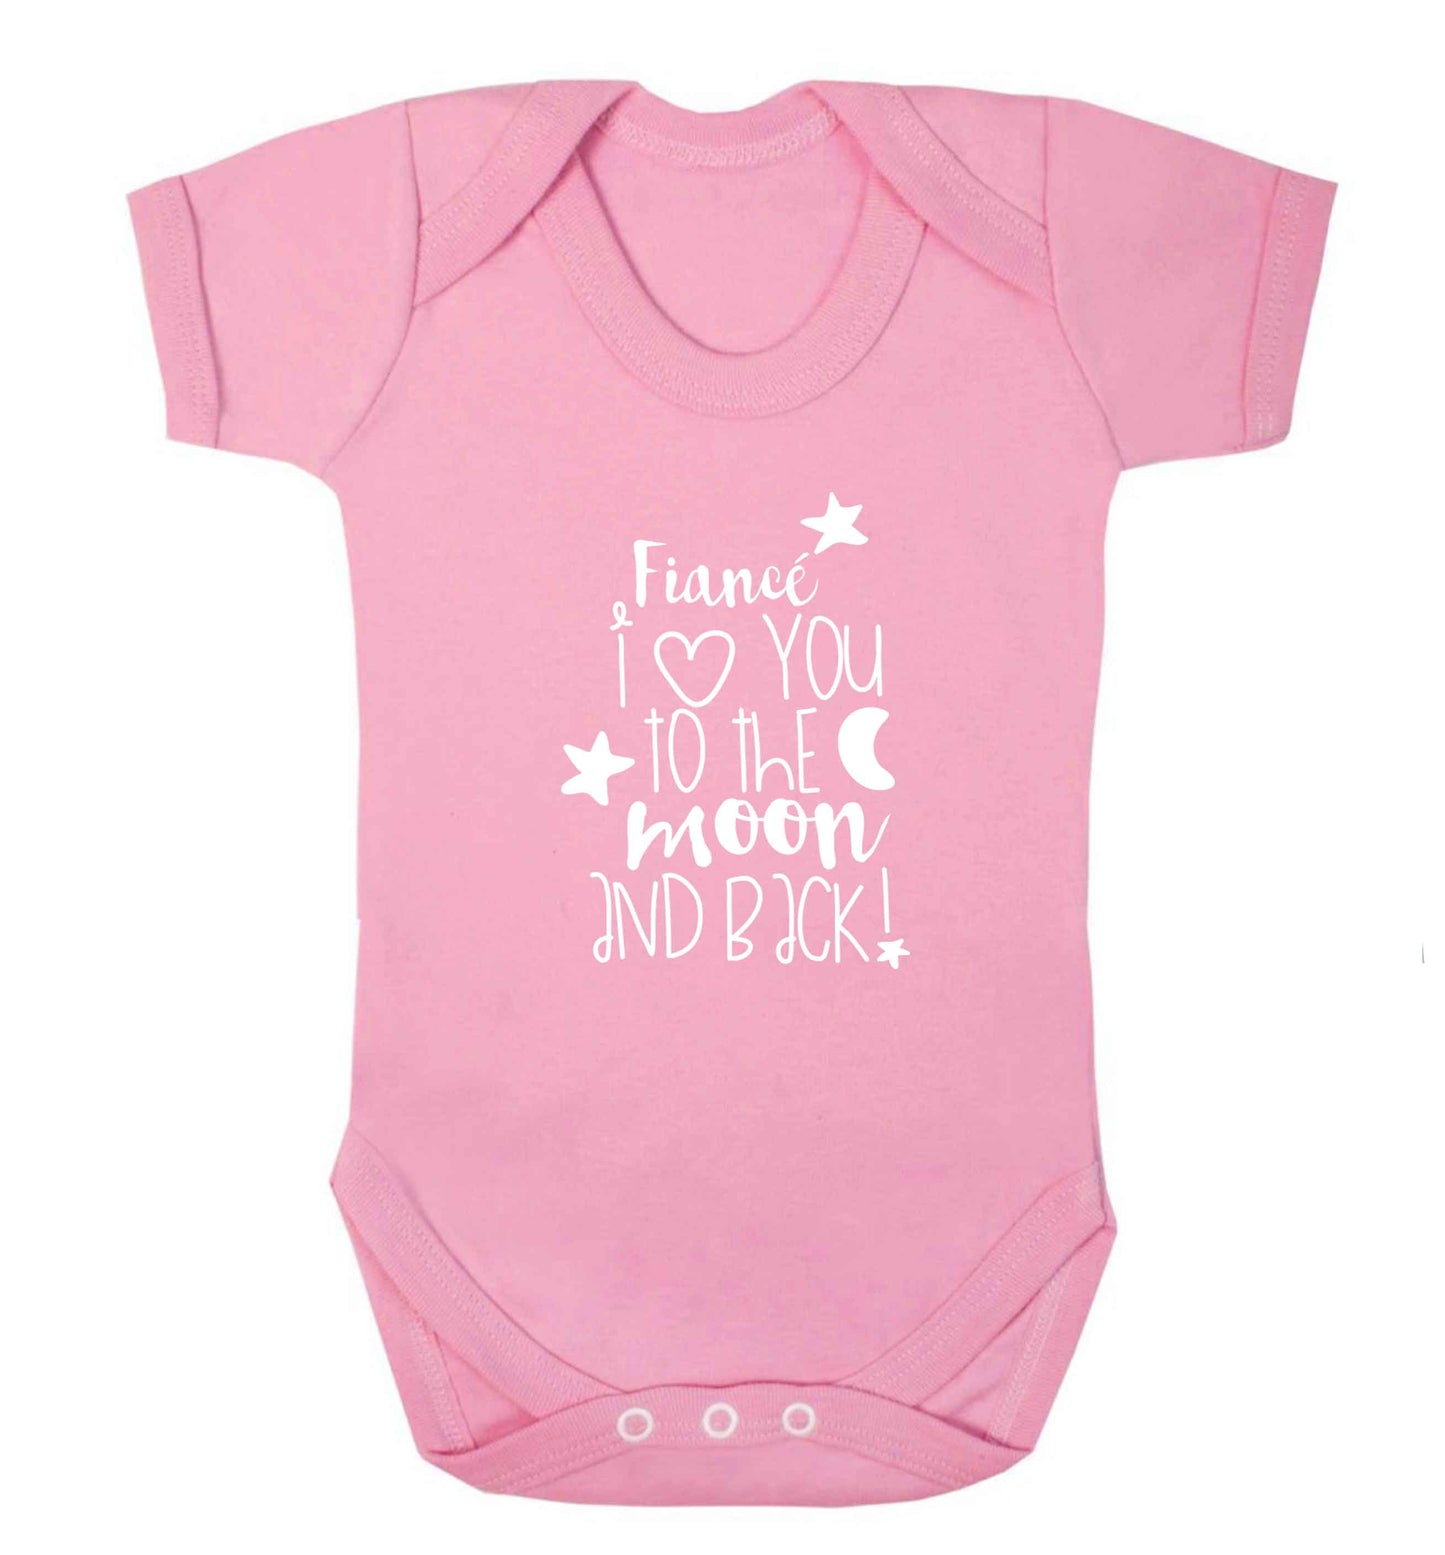 Fianc√© I love you to the moon and back baby vest pale pink 18-24 months